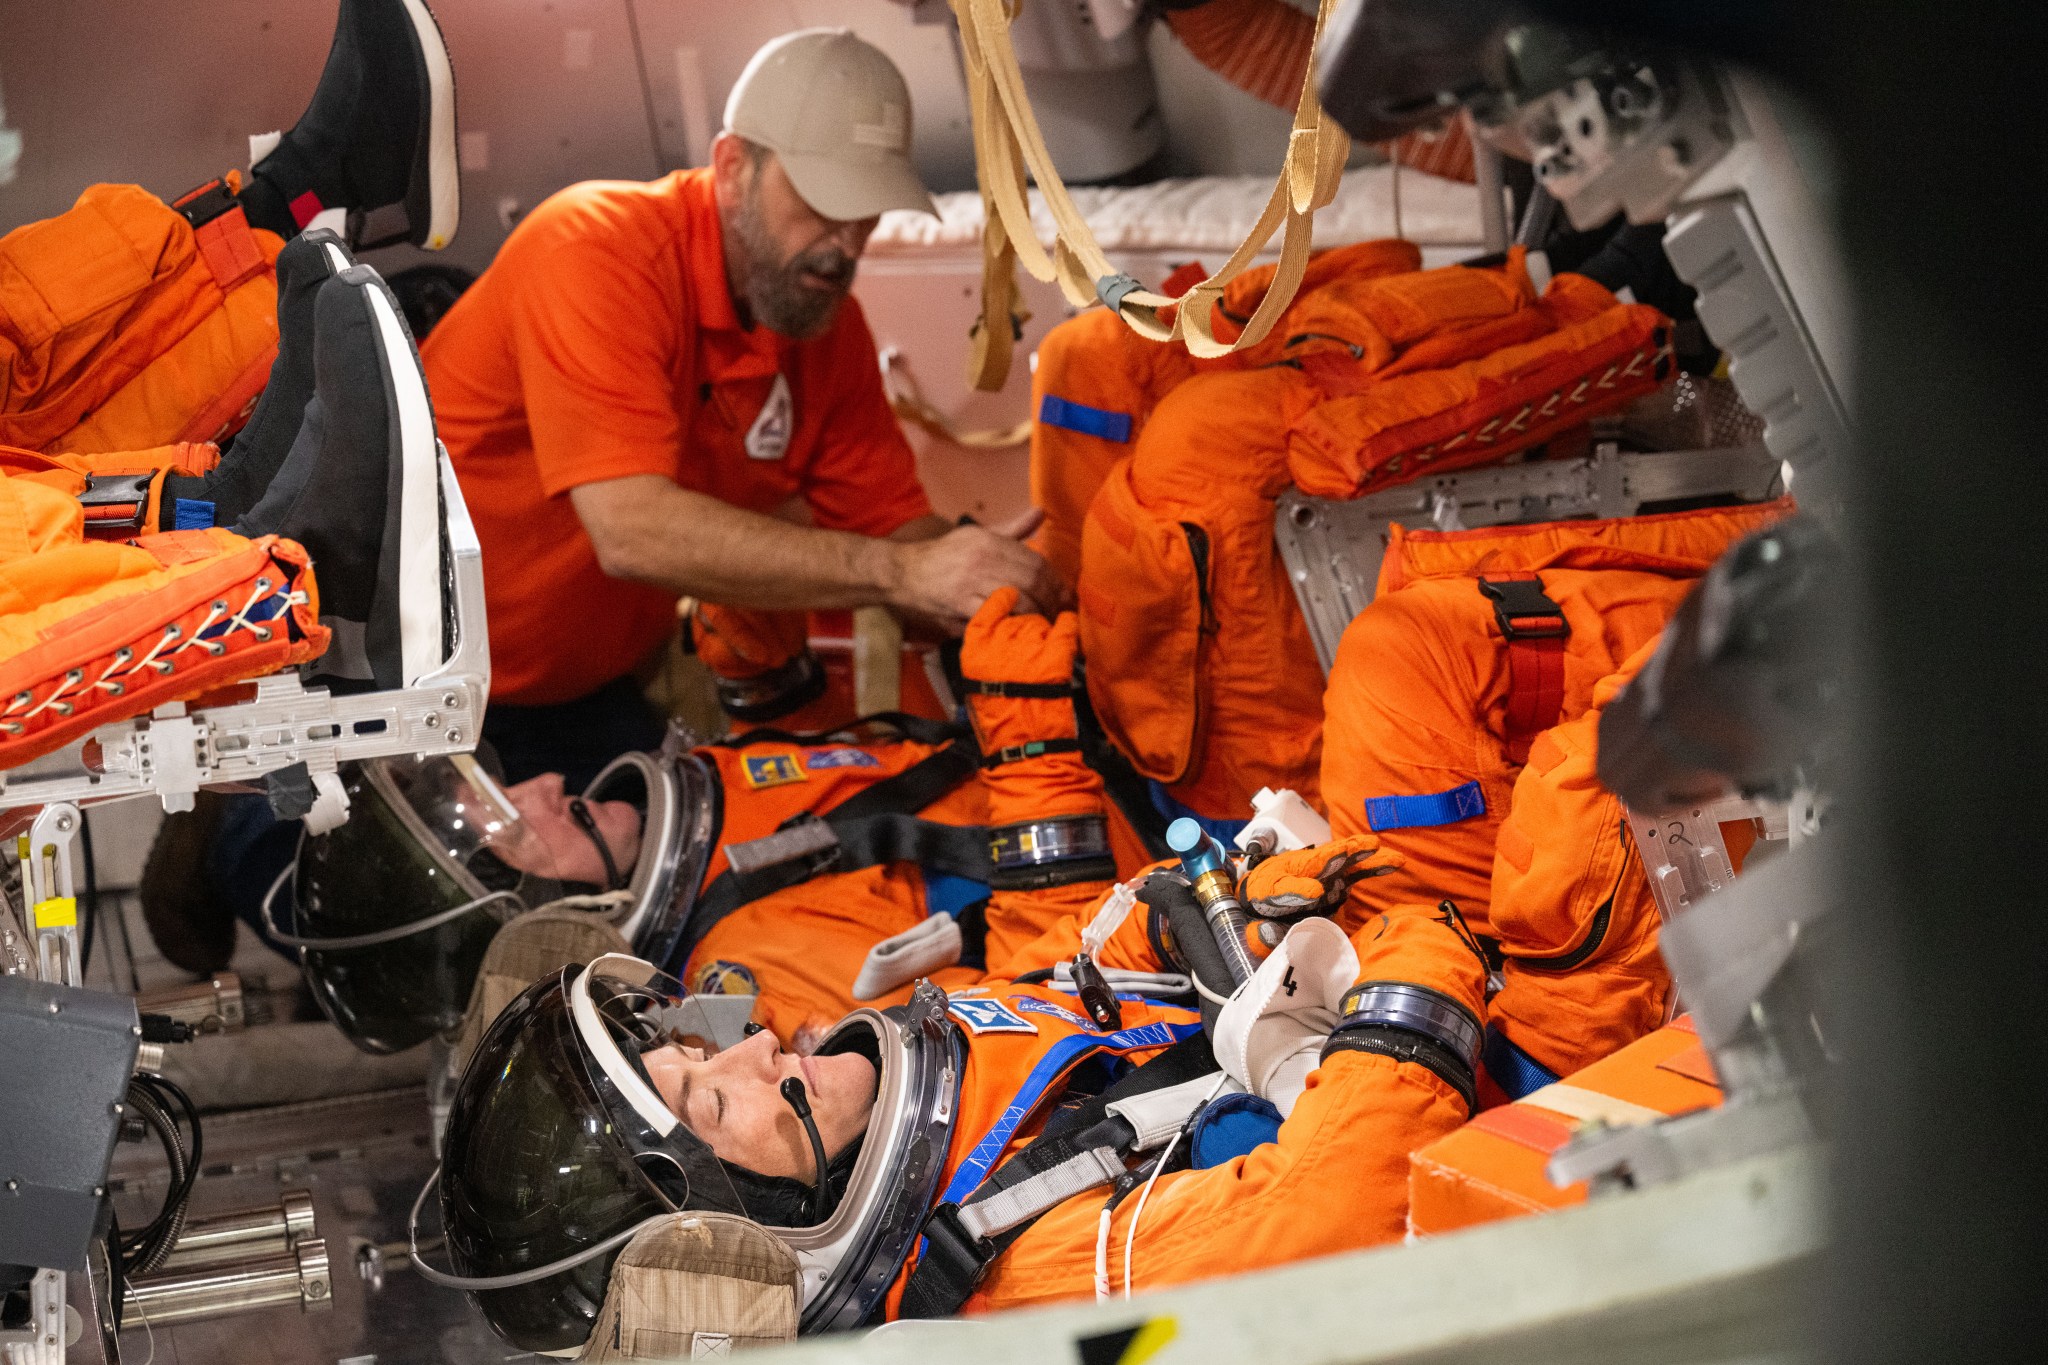 Two astronauts in orange spacesuits and helmets sit horizontal with their feet raised in a mockup of the Orion spacecraft. The feet of two other astronauts are above them on the left. All are assisted by a man in a beige hat.